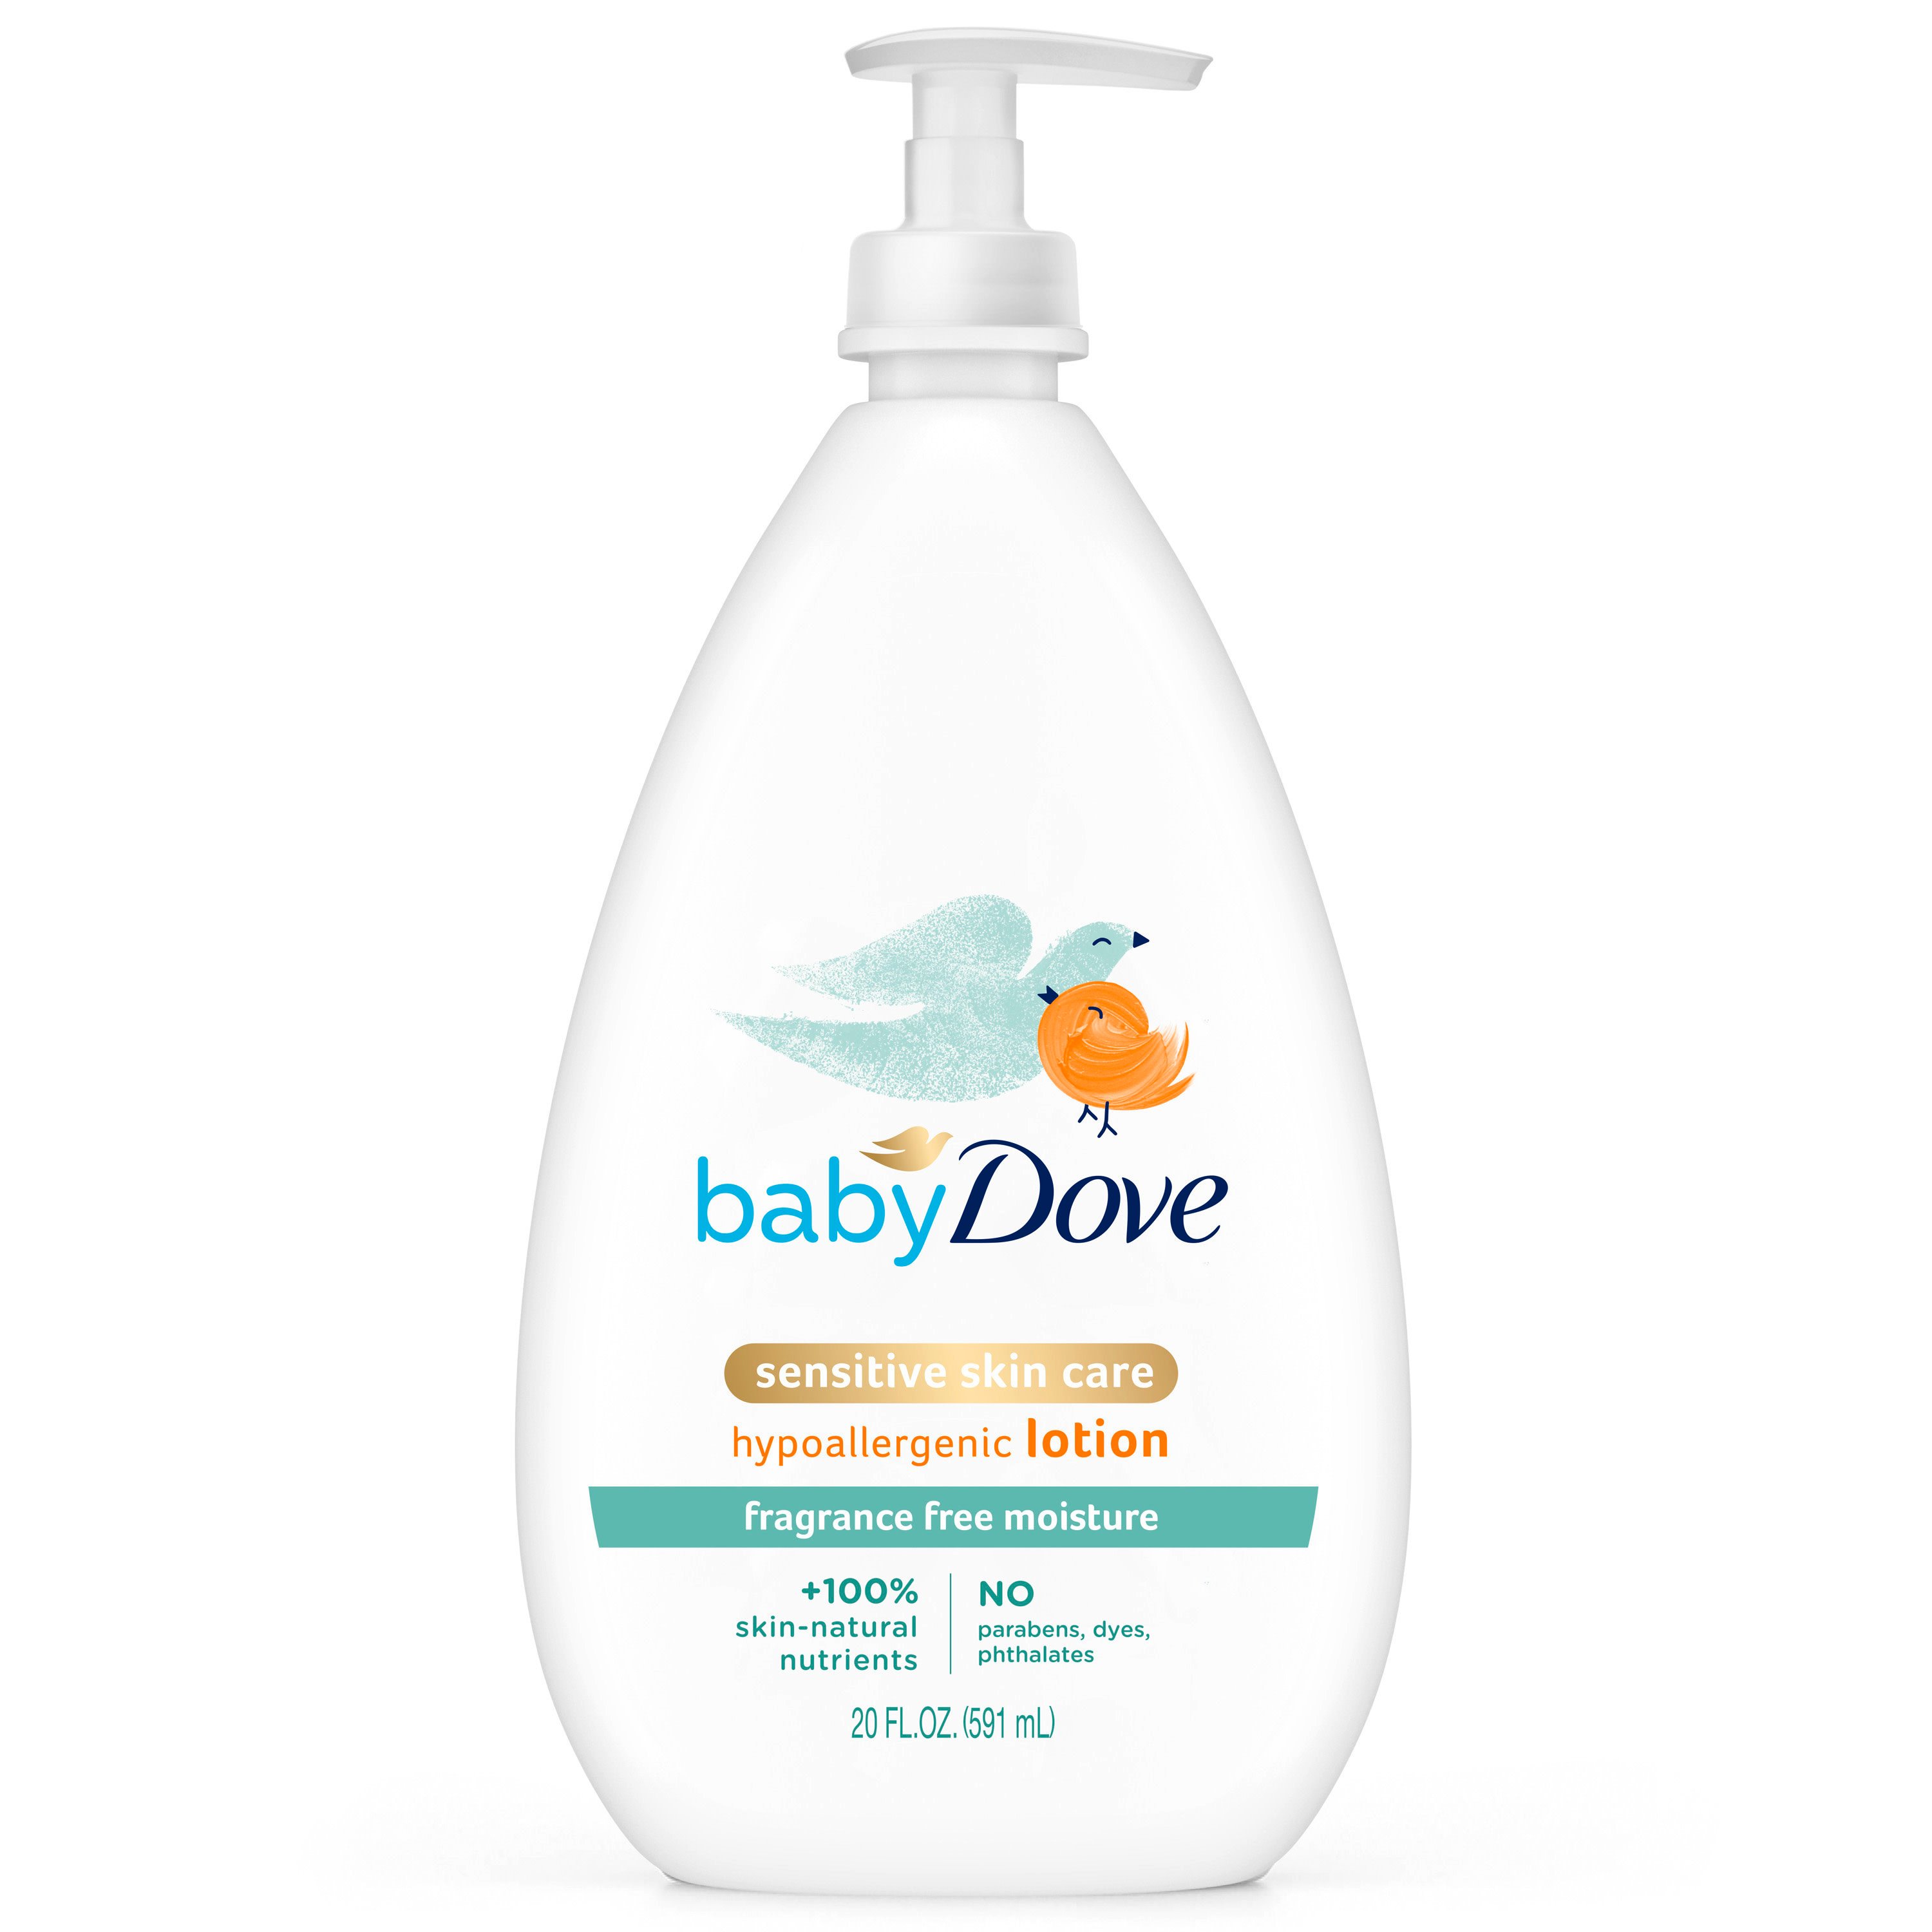 dove powder for baby